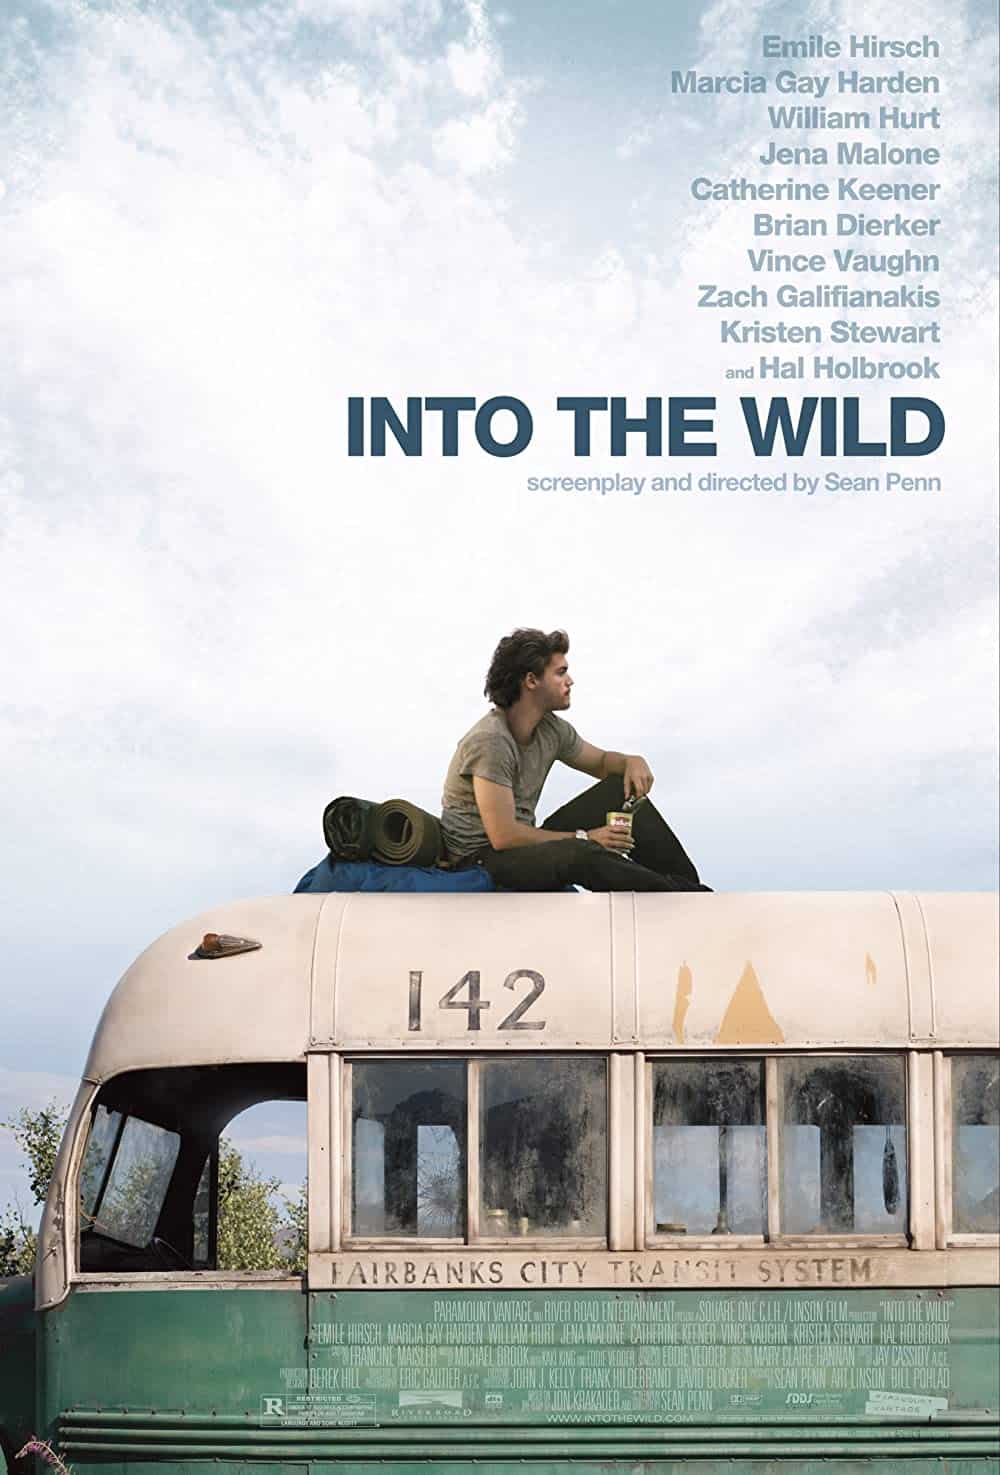 Into the Wild (2007) 15 Best Nature Movies to Add in Your Watchlist